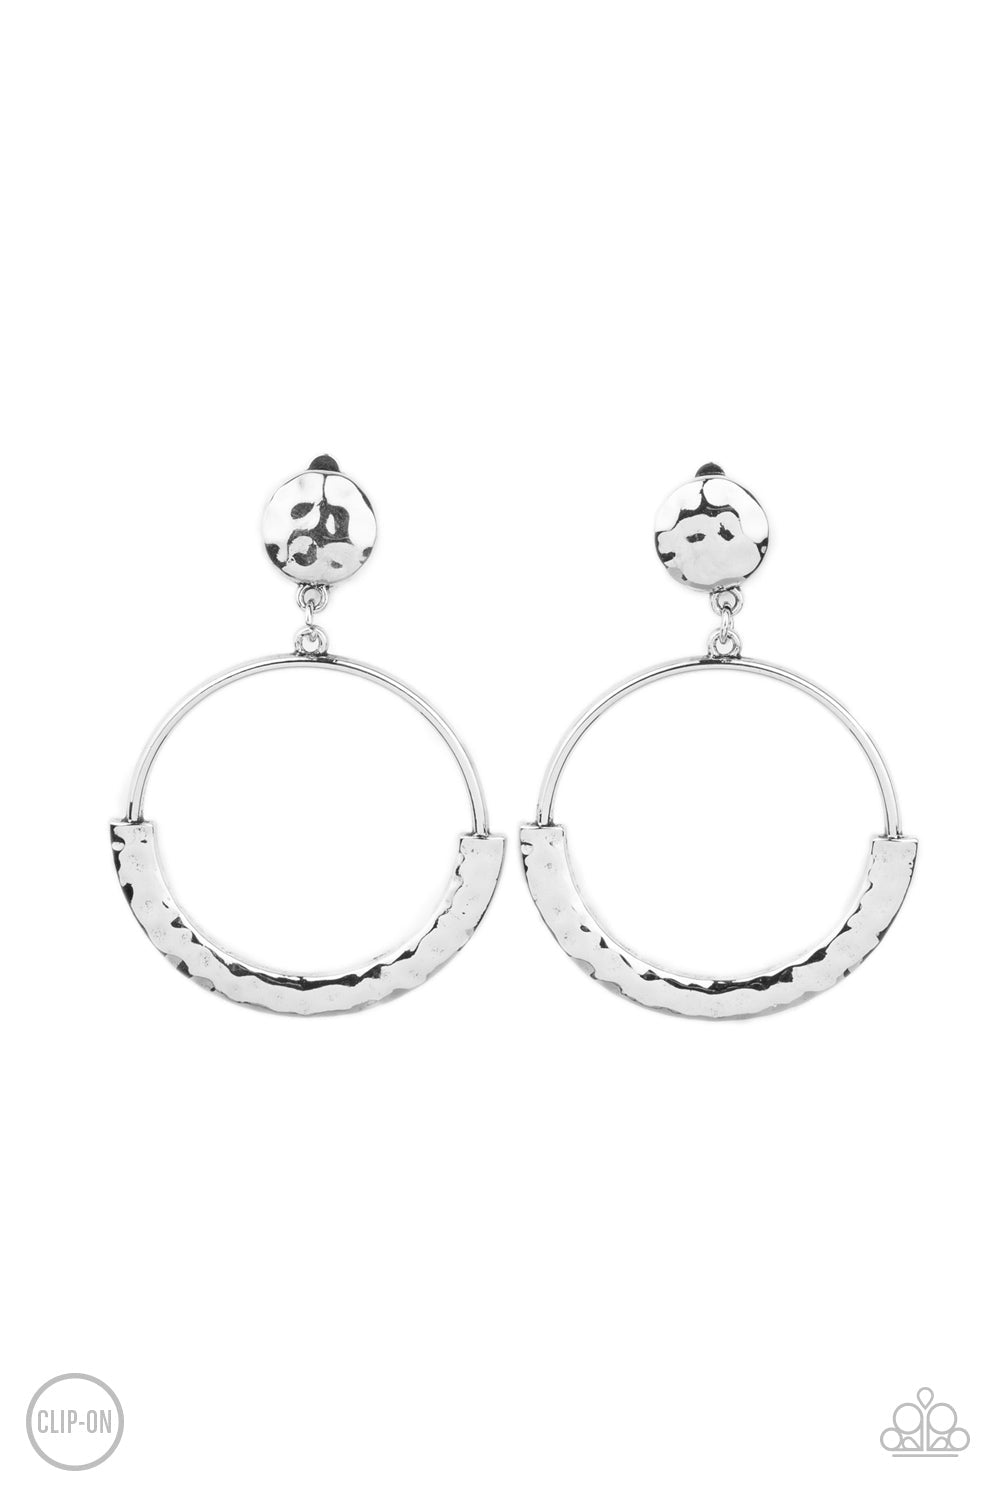 Rustic Horizons - Silver Clip-On Fashion Earrings - Paparazzi Accessories - The bottom of an antiqued silver hoop is covered with a bowing hammered frame at the bottom of a hammered silver disc, creating a rustic lure. Earring attaches to a standard clip-on fitting. Sold as one pair of clip-on earrings.